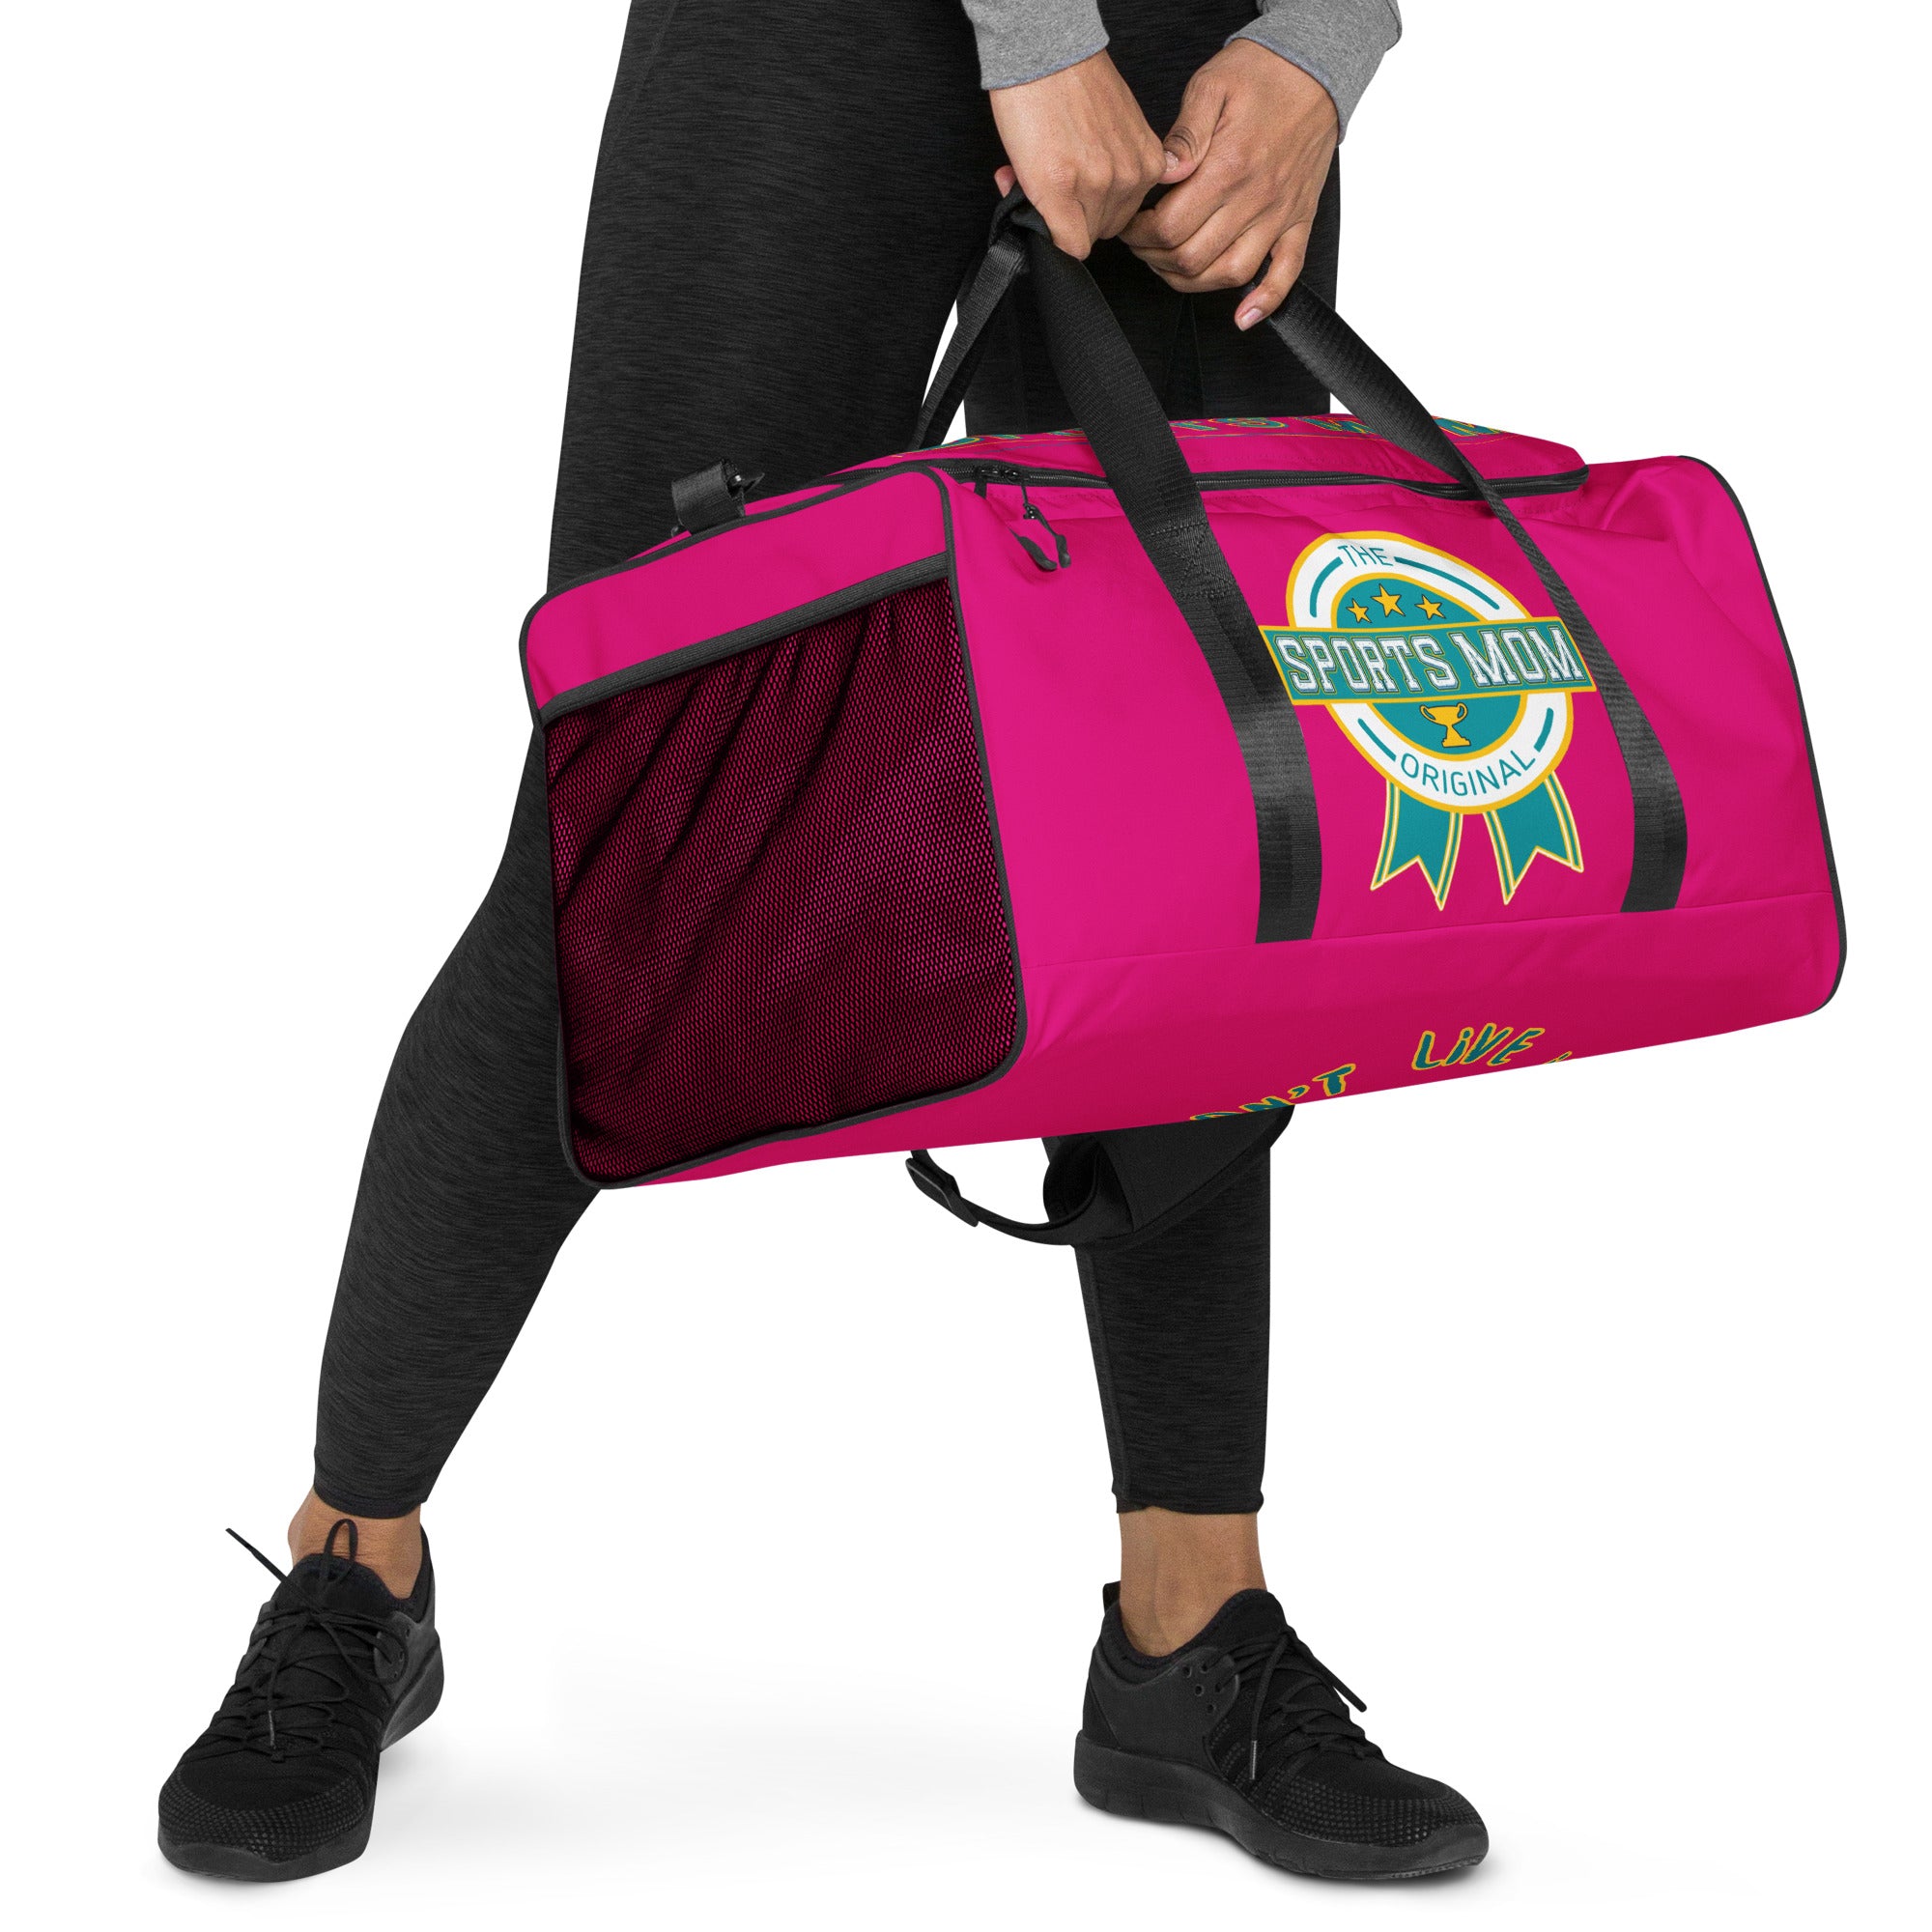 Sports Mom Ultimate Duffle Bag - Vibrant Pink